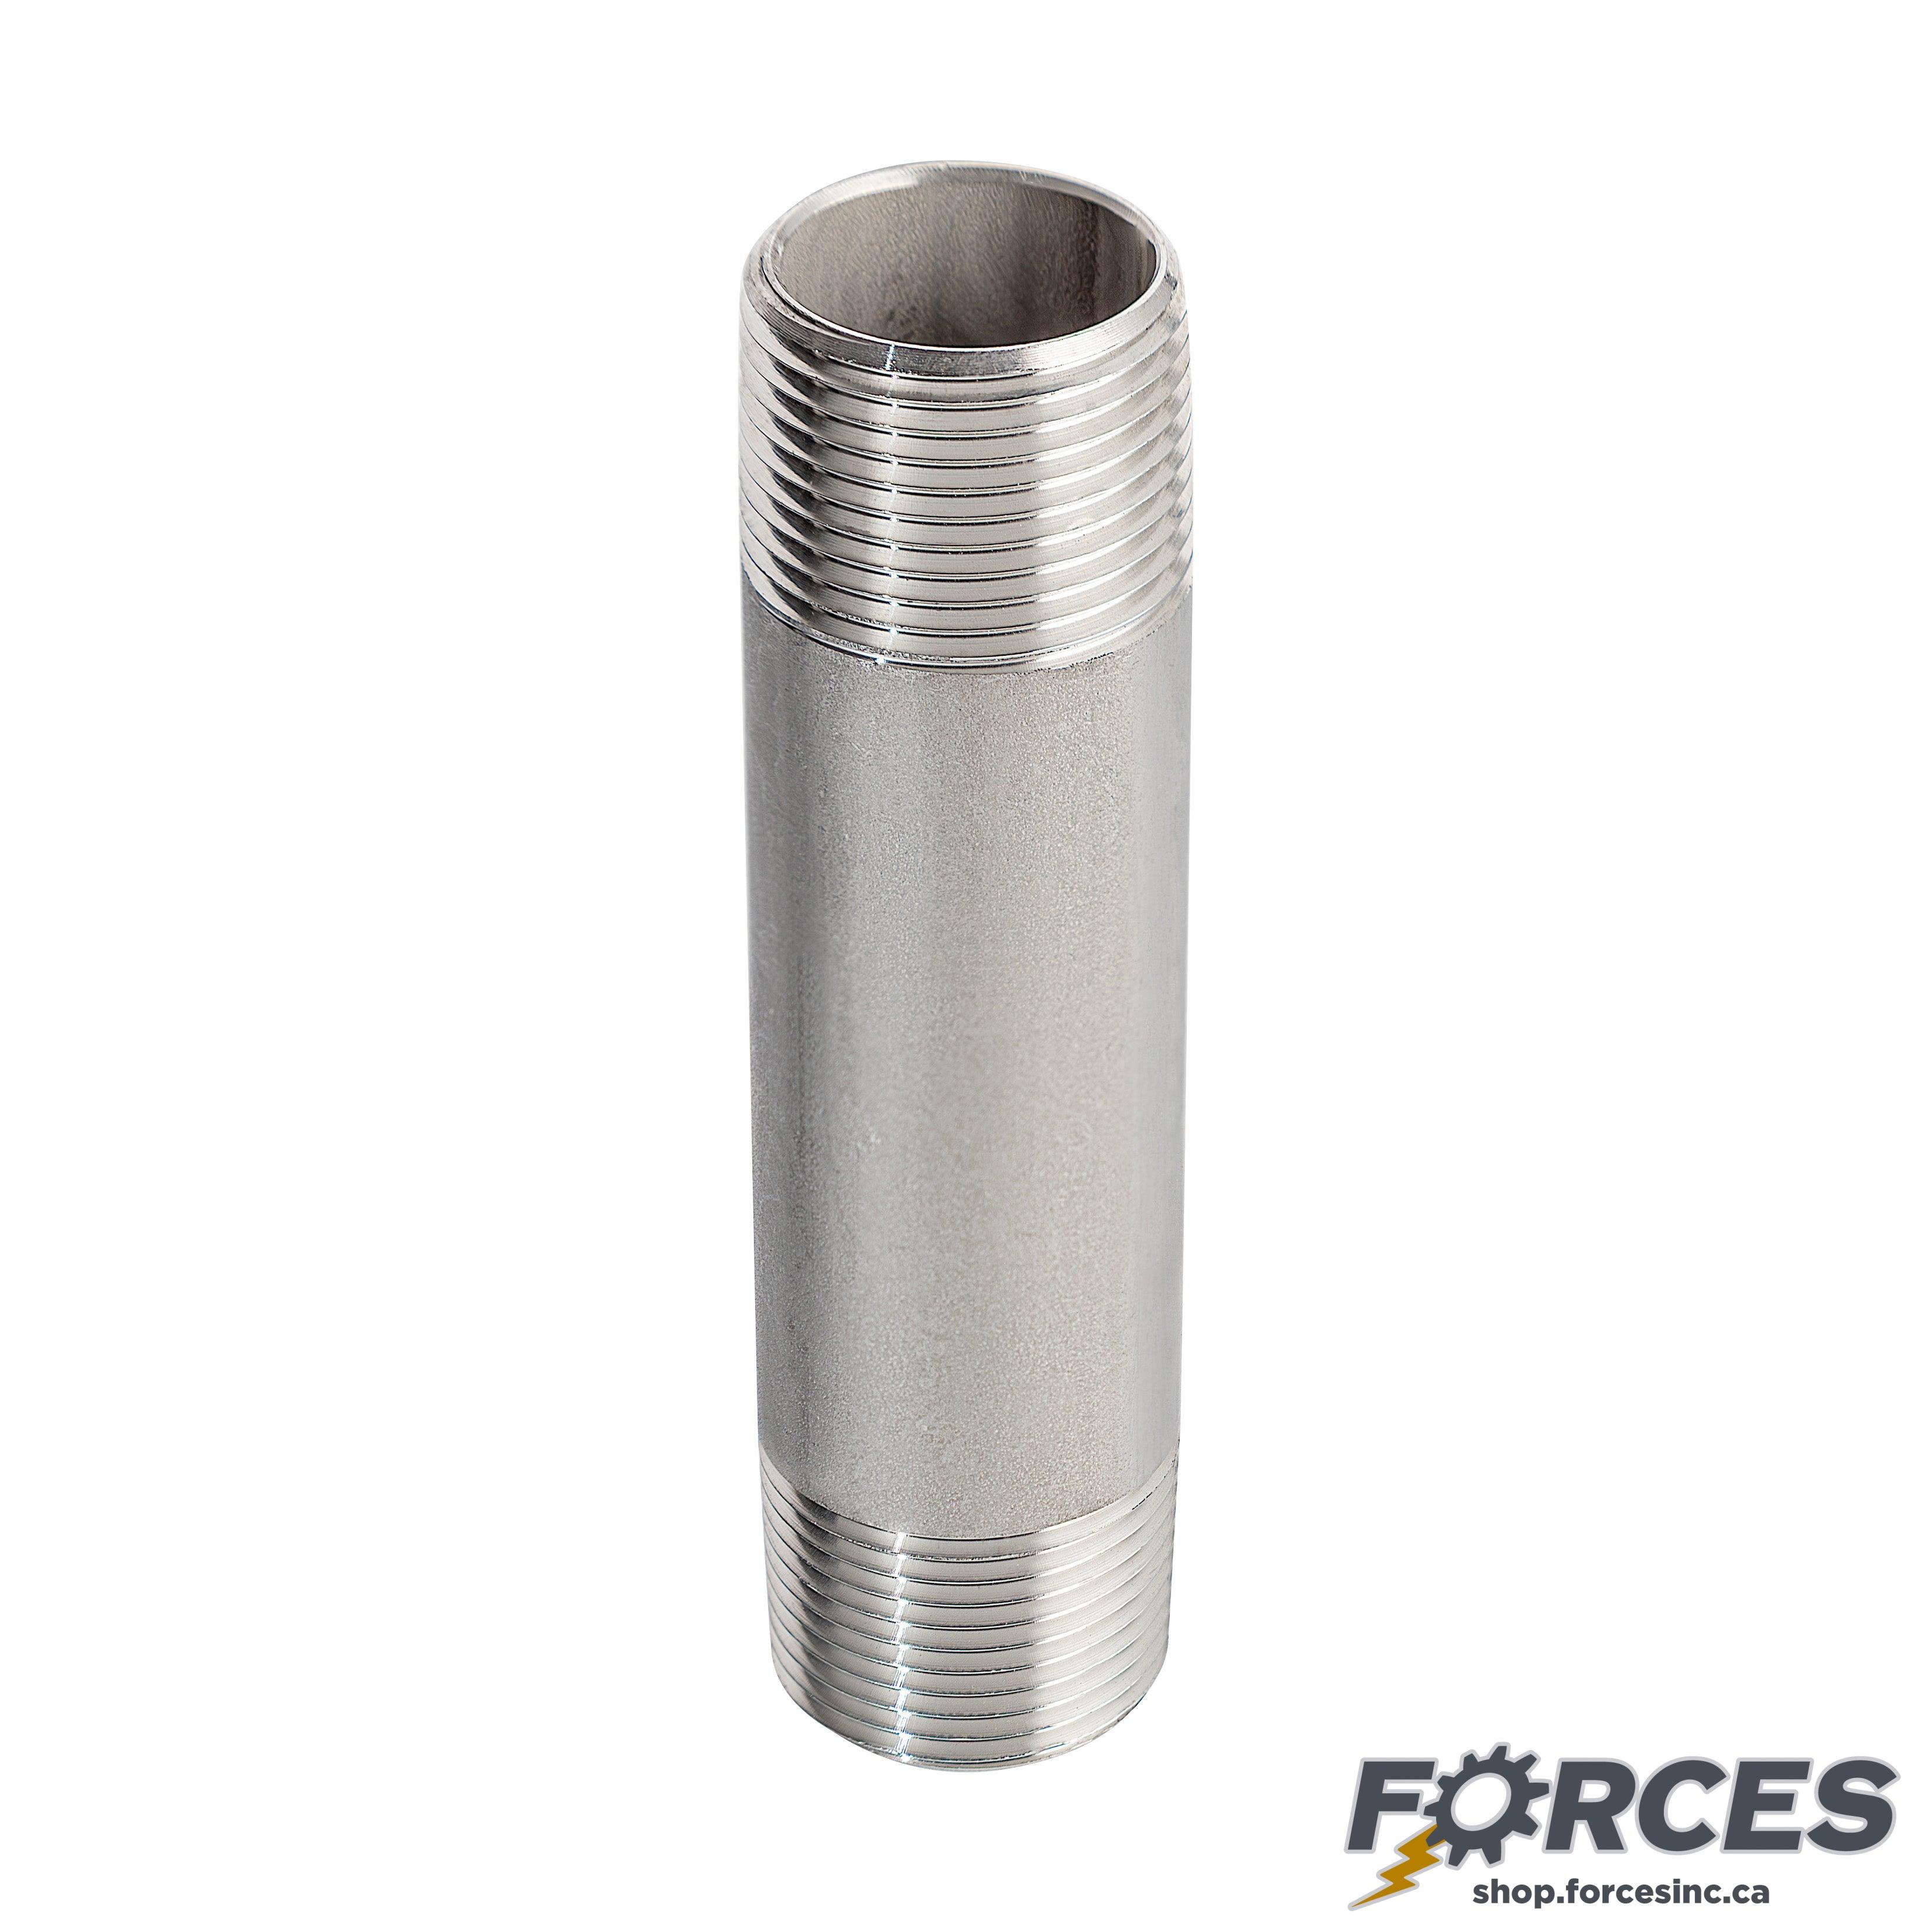 1" X 4" Long Nipple - Stainless Steel 316 - Forces Inc